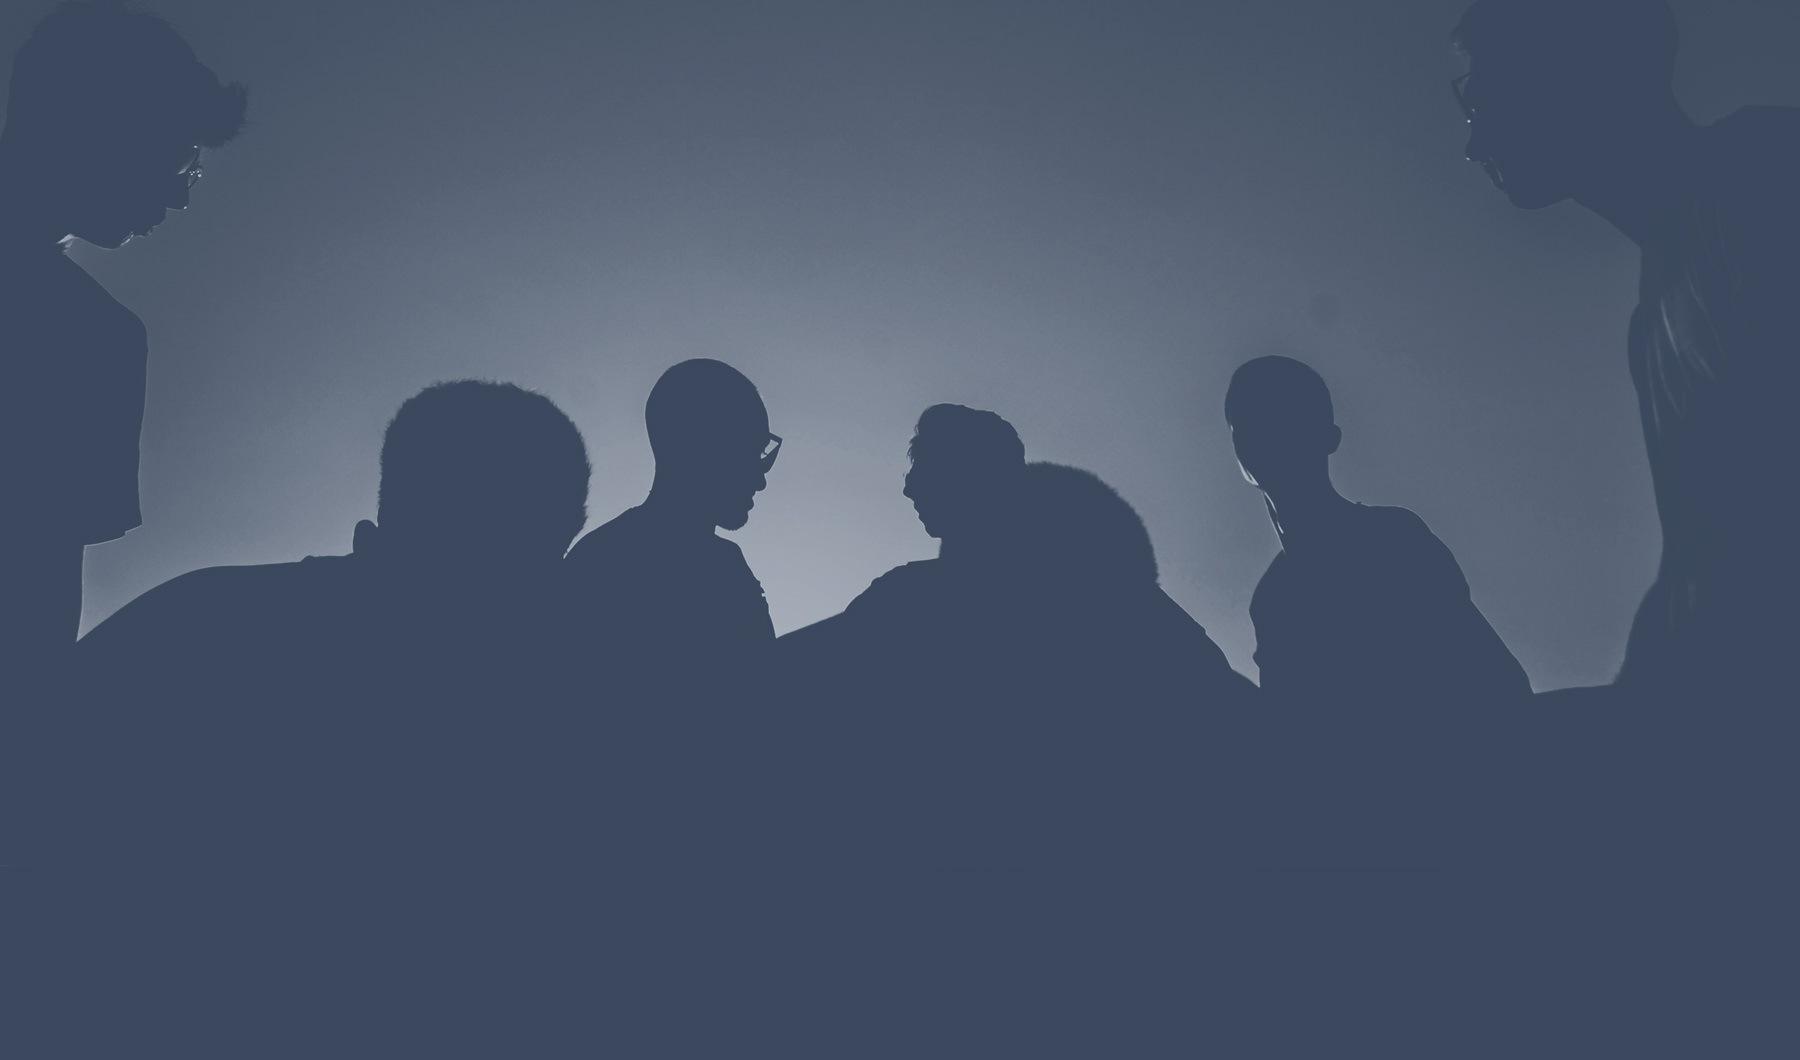 Silhouette of people standing together